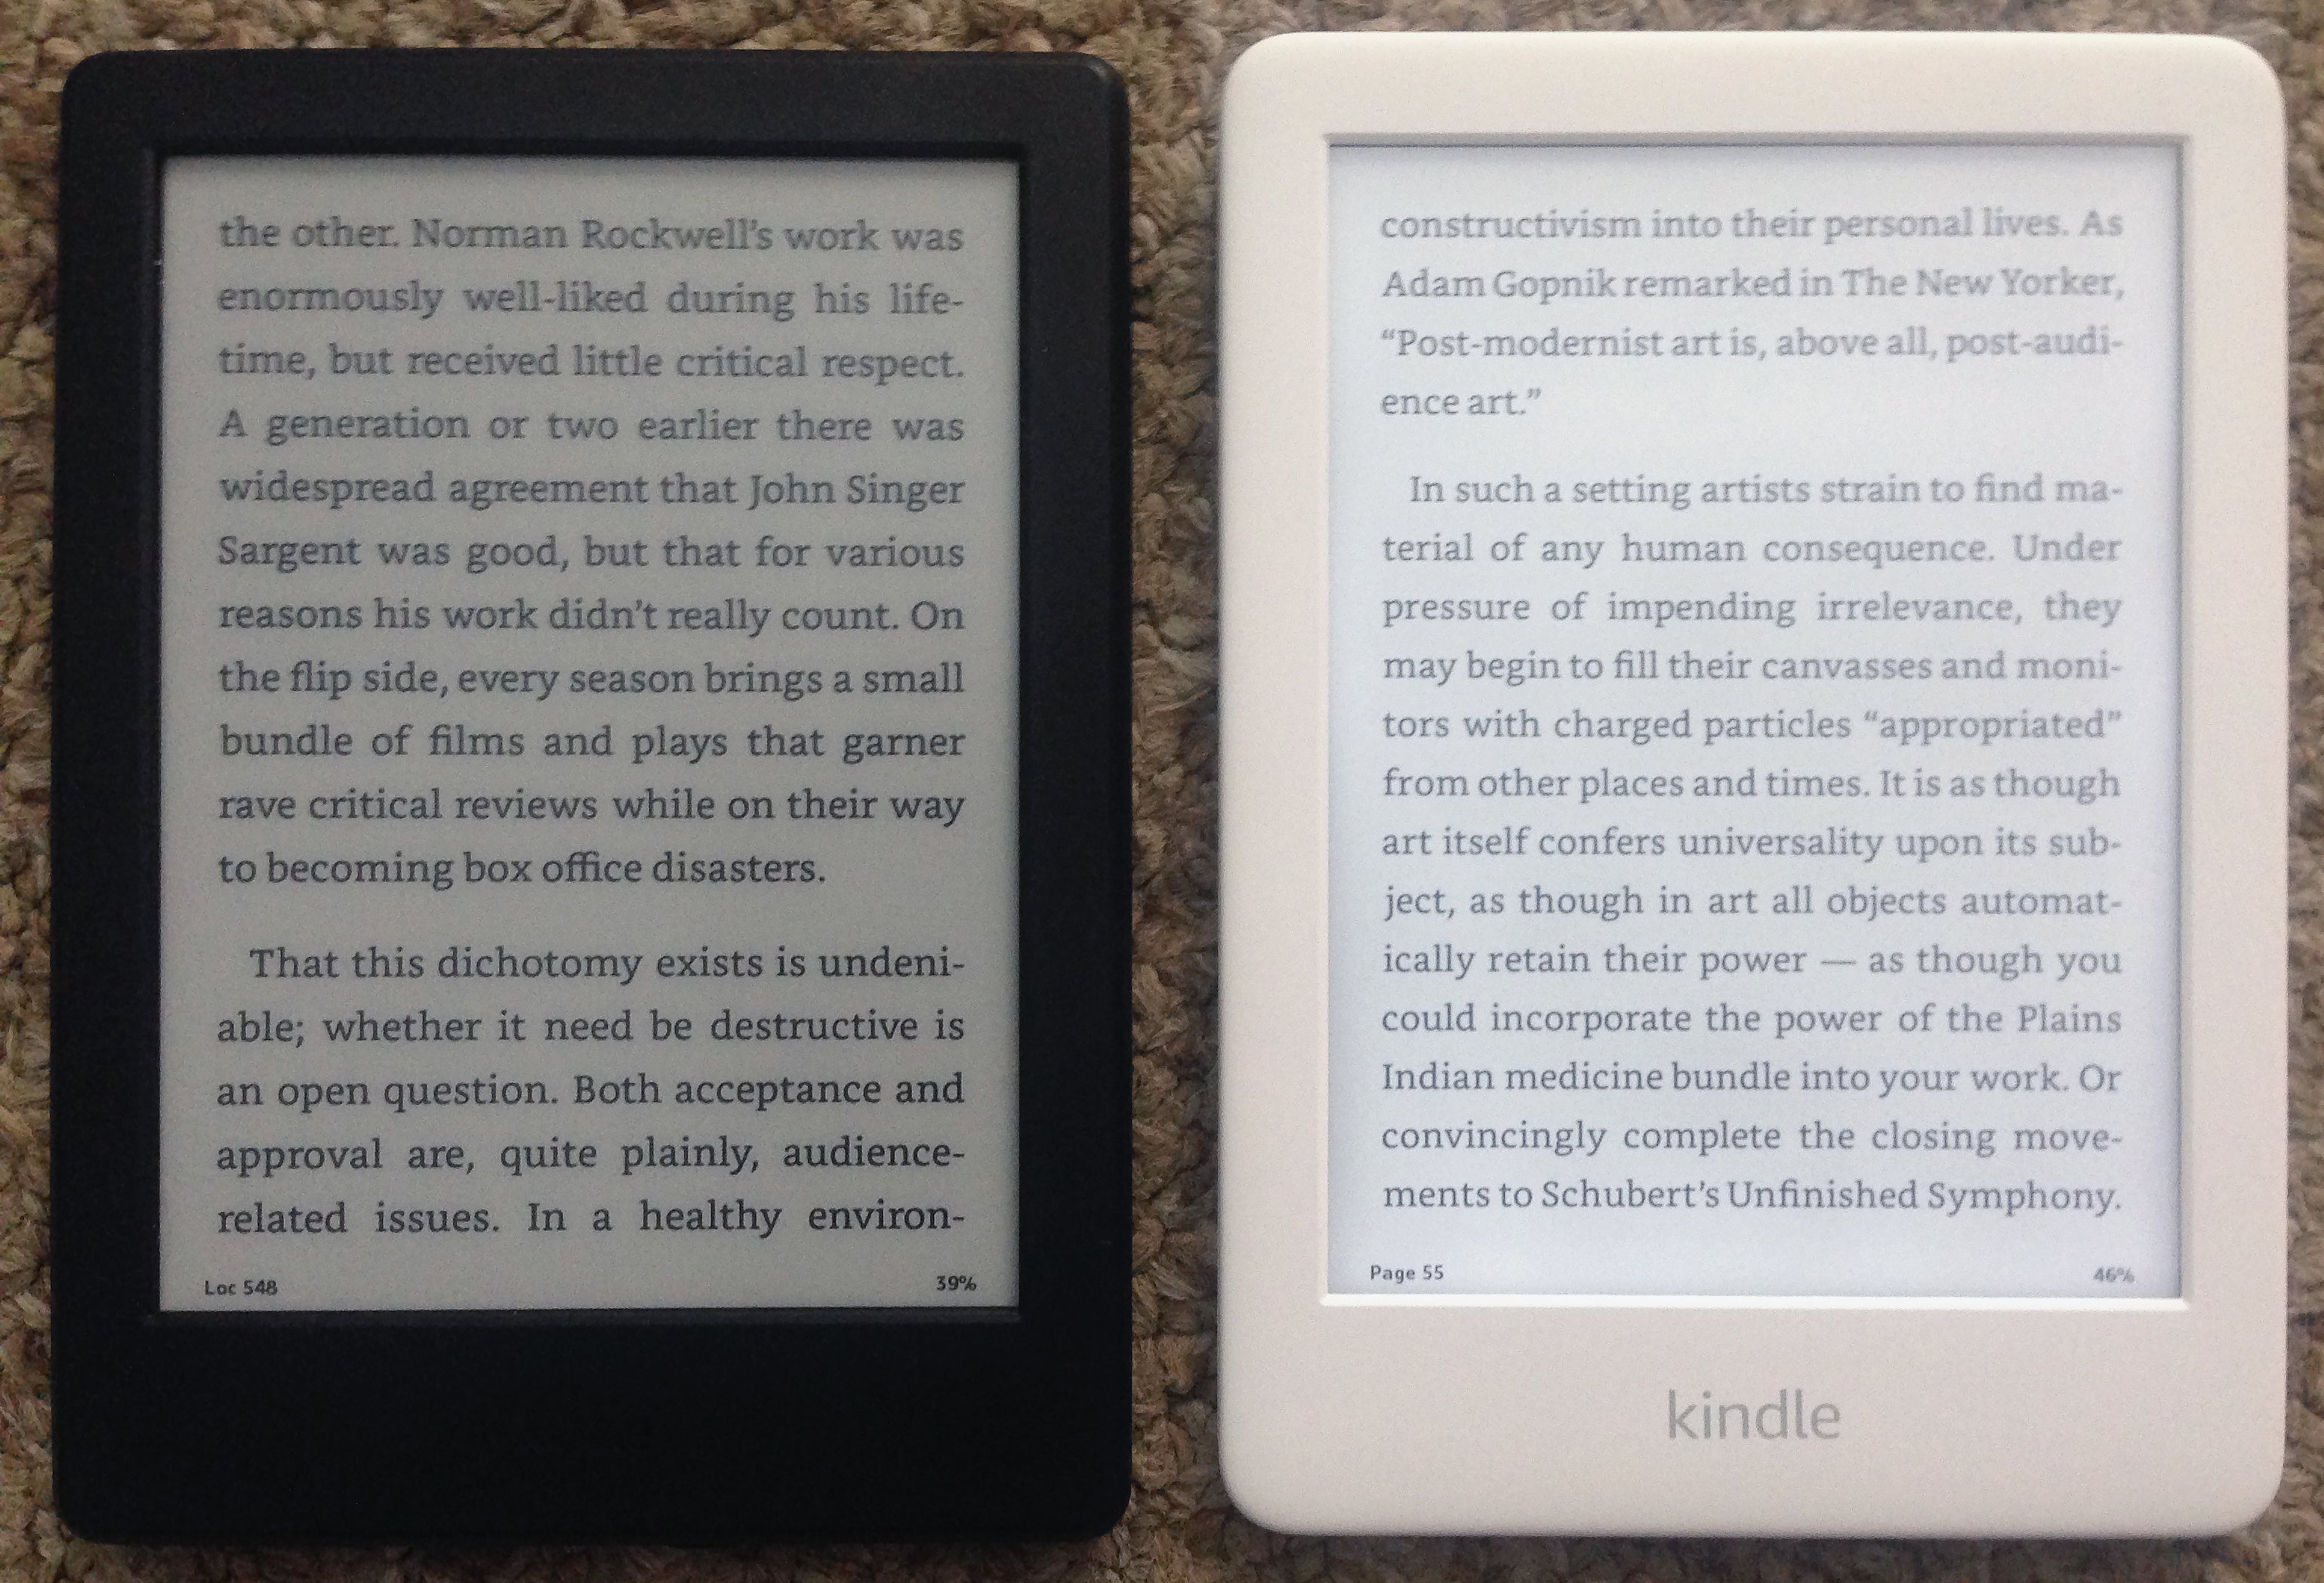 Amazon Allnew Kindle review Front lighting and a better screen